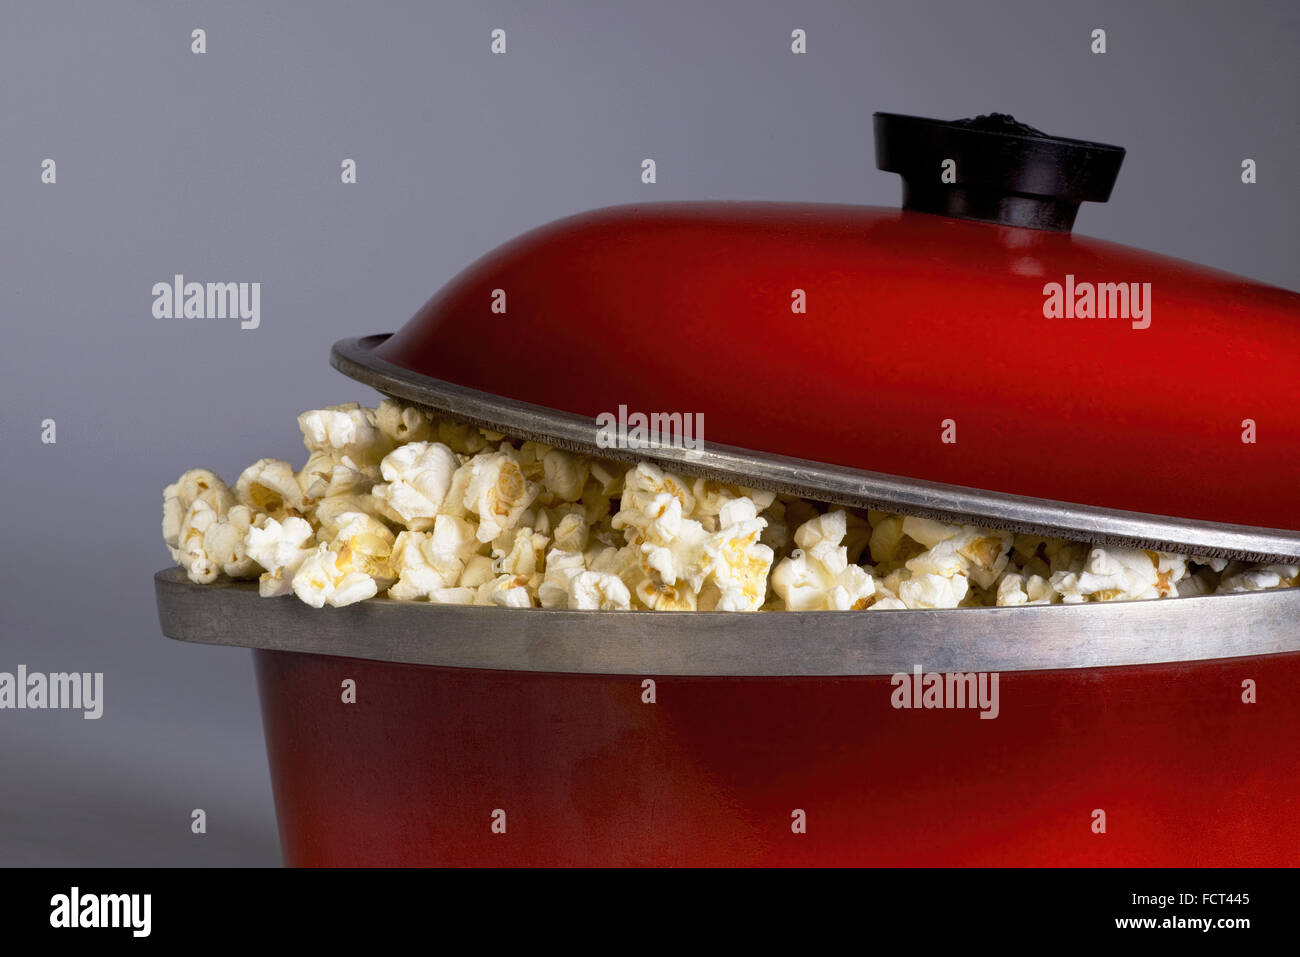 Making popcorn with an electric popper at home Stock Photo - Alamy